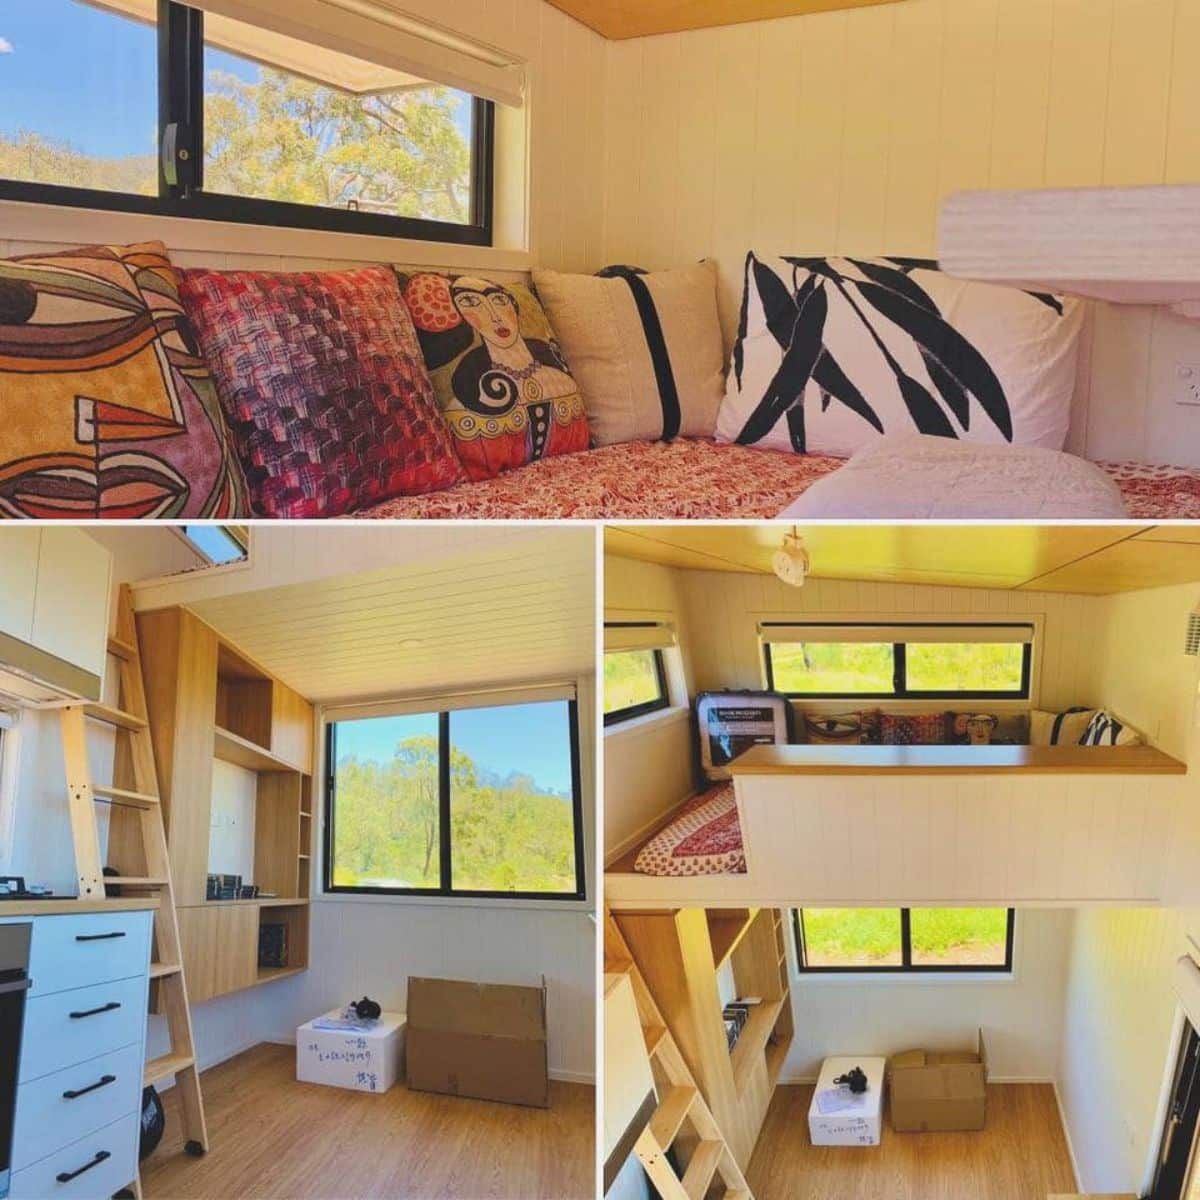 Interiors of sustainable tiny home